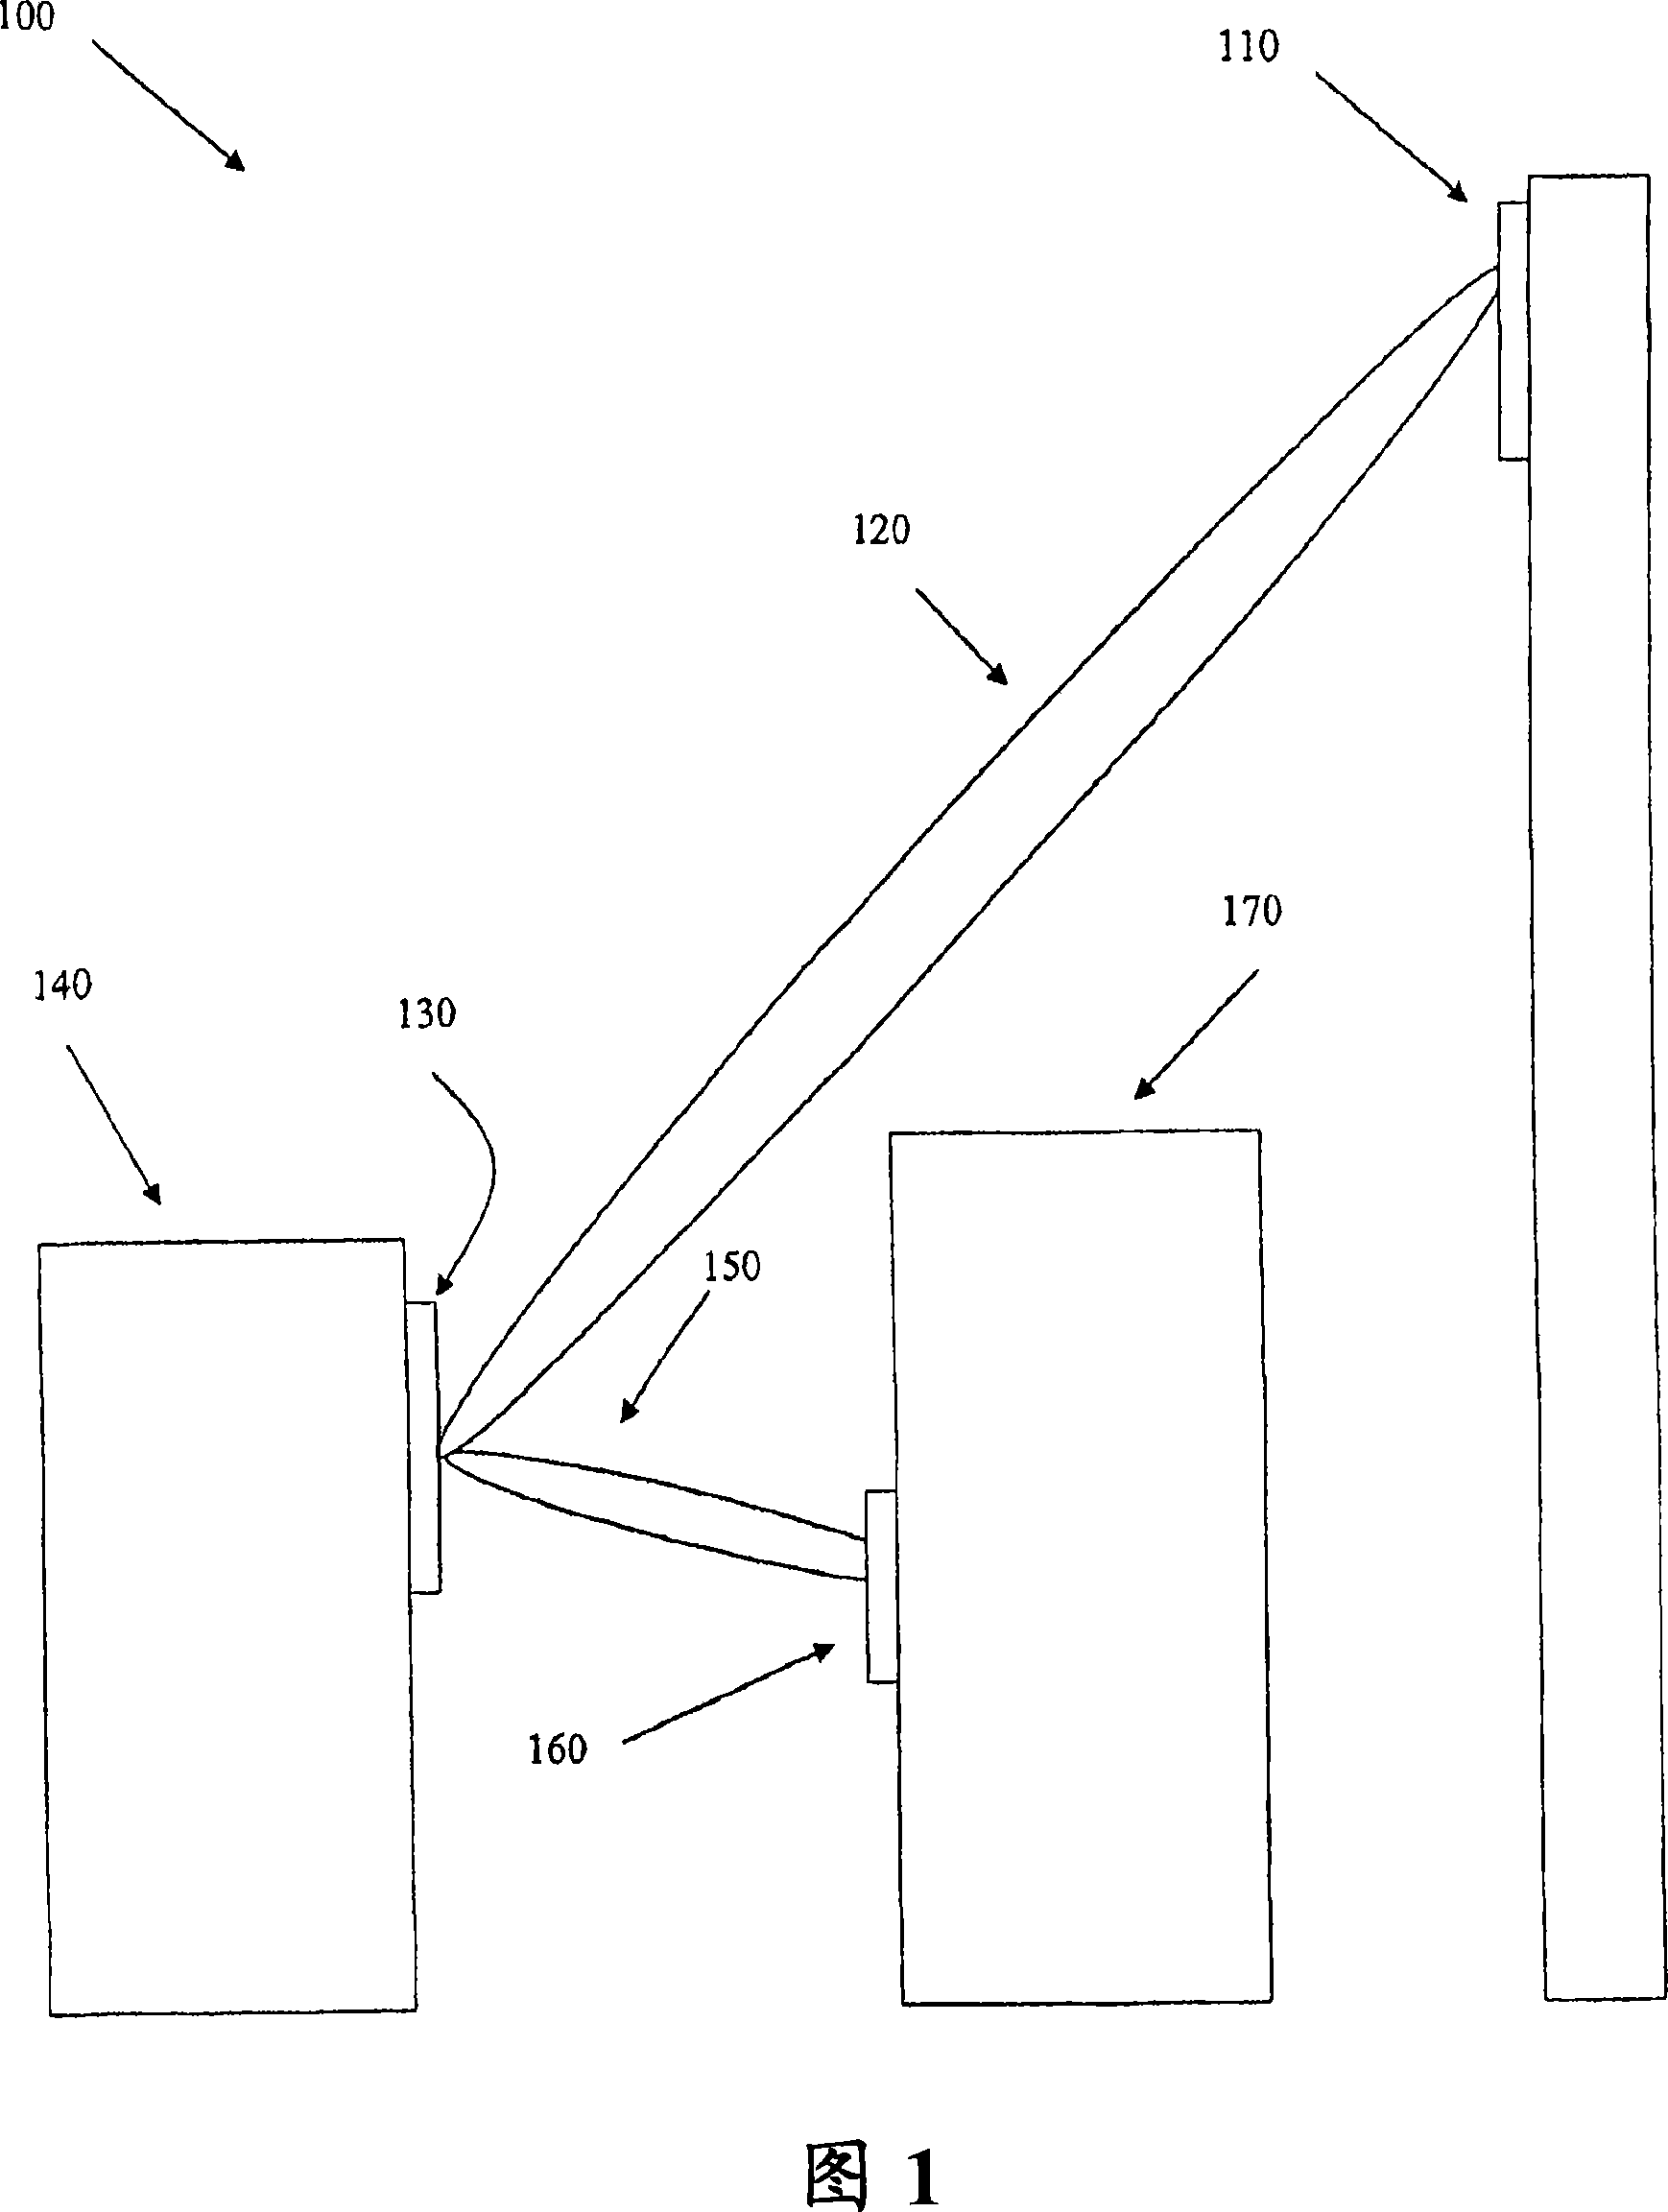 Improved forwarding antenna for point-to-point application